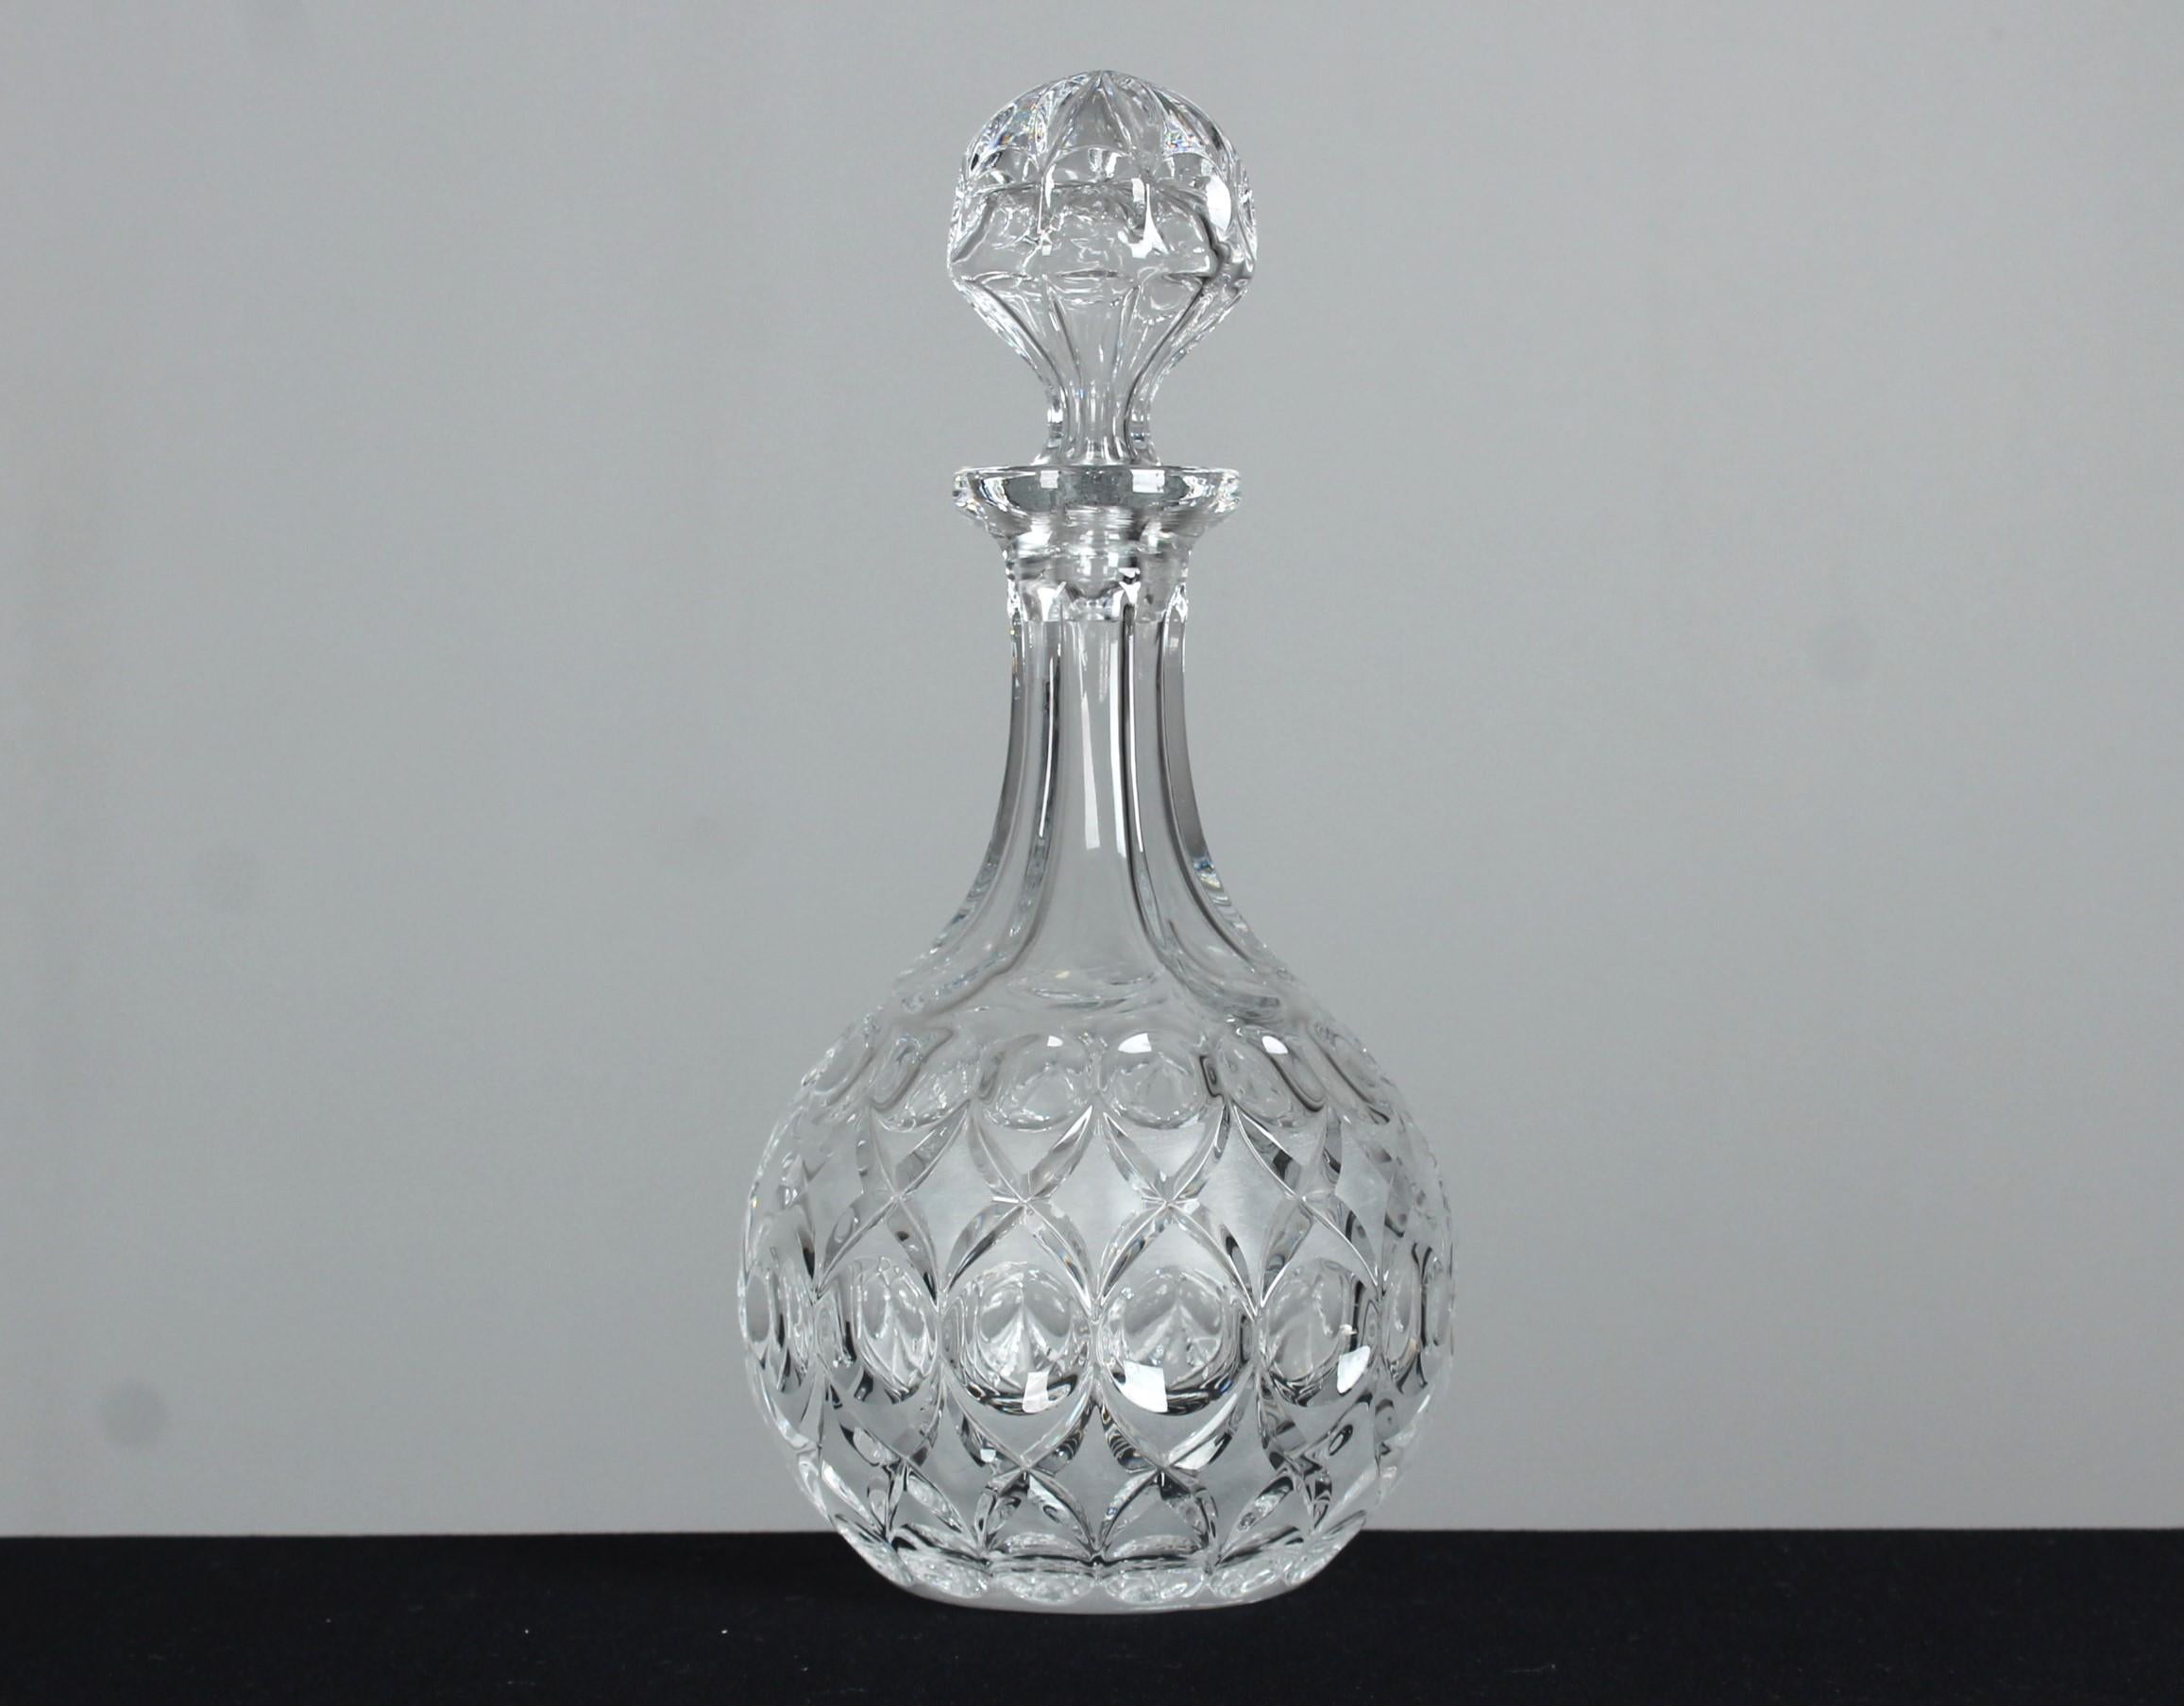 This masterfully crafted carafe combines aesthetic beauty with practicality and is a timeless symbol of sophistication and style.

The characteristic feature of crystal glass is its clarity and brilliance, which is achieved through the use of